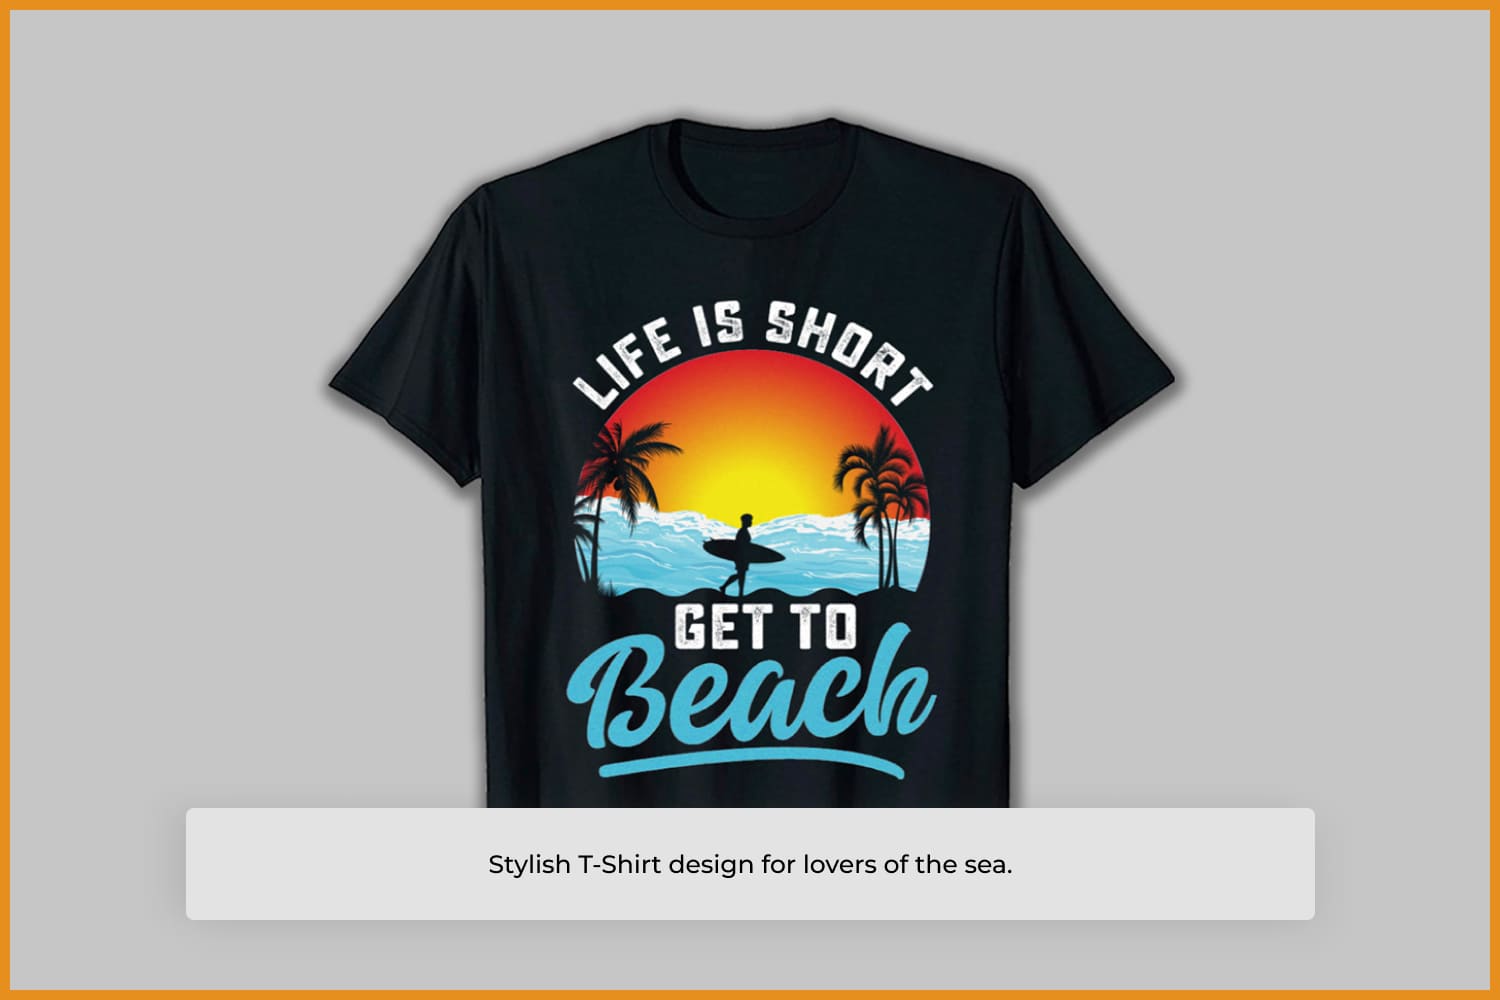 Stylish T-shirt design for lovers of the sea.